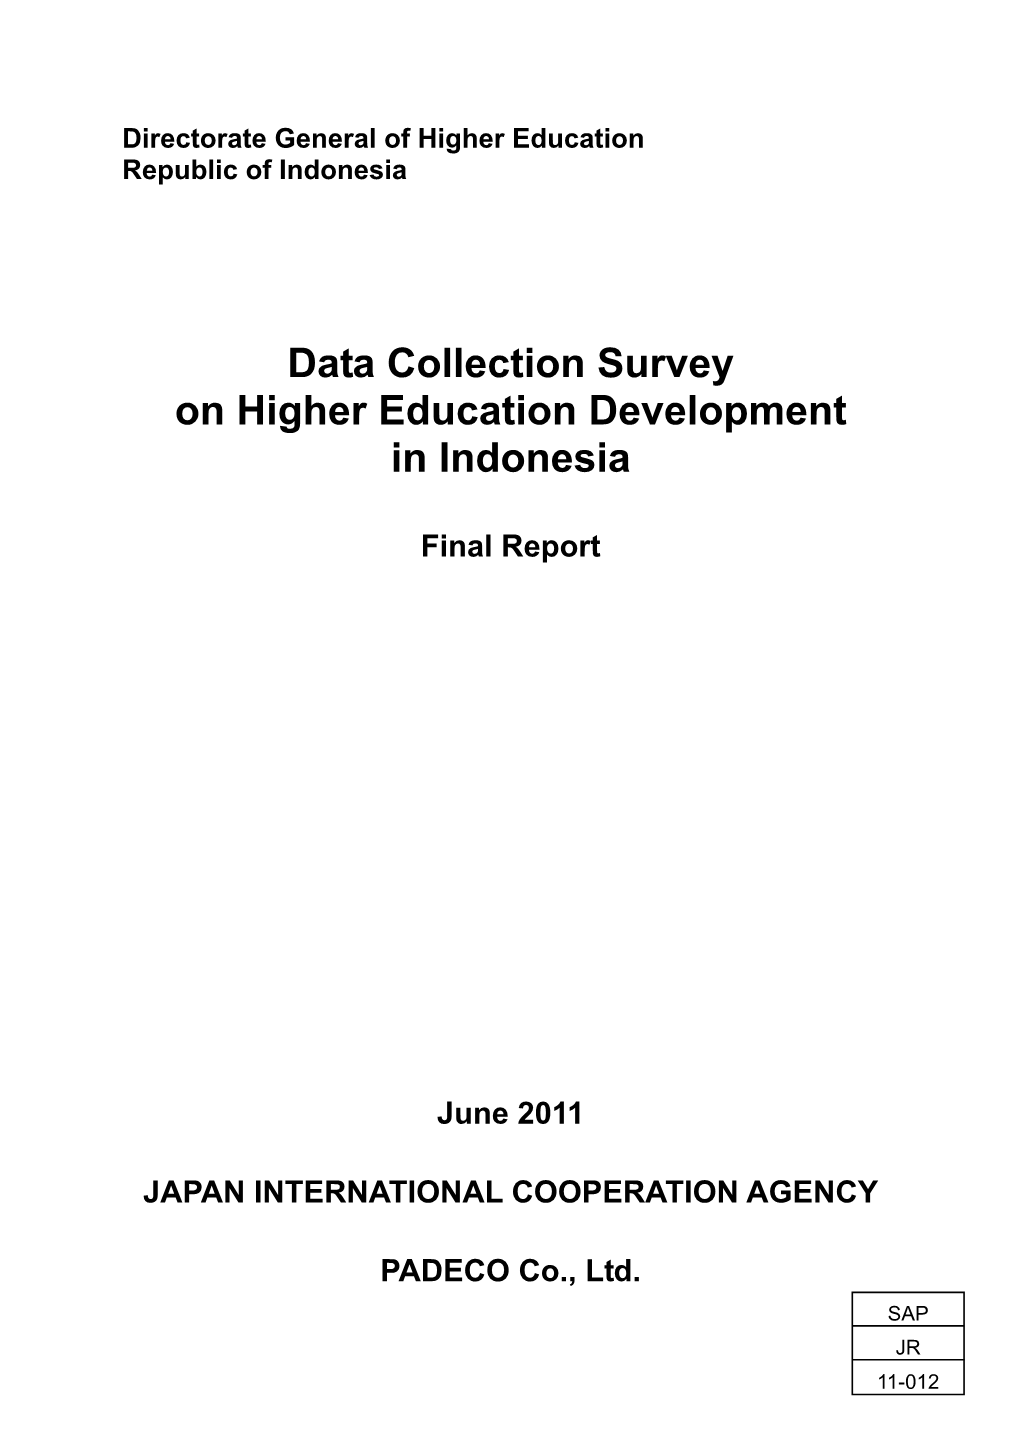 Data Collection Survey on Higher Education Development in Indonesia